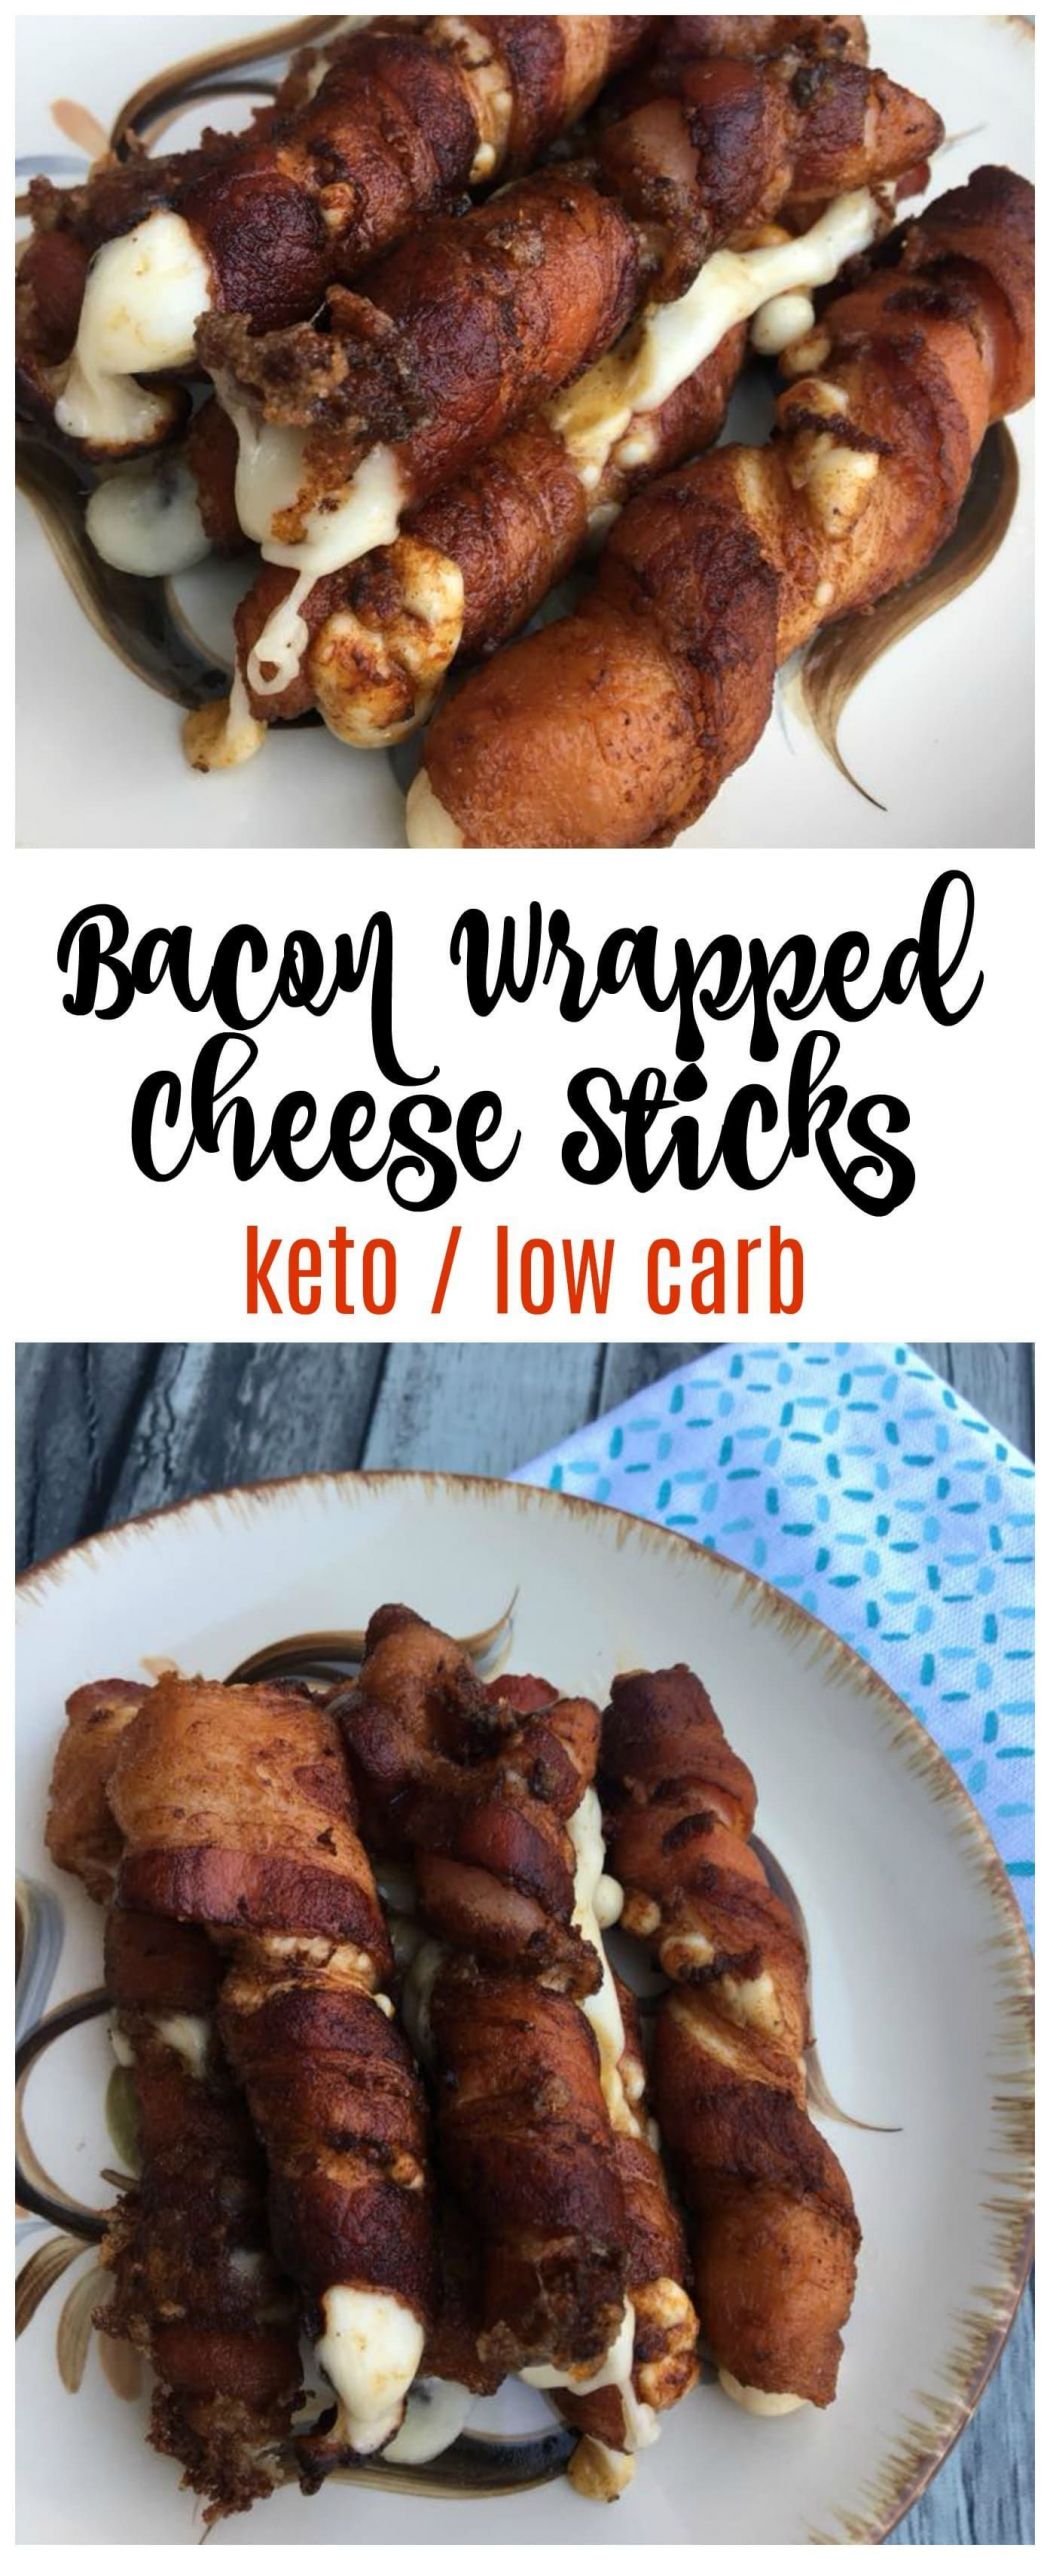 Low Carb Thanksgiving Appetizers
 Bacon Wrapped Cheese Sticks keto low carb